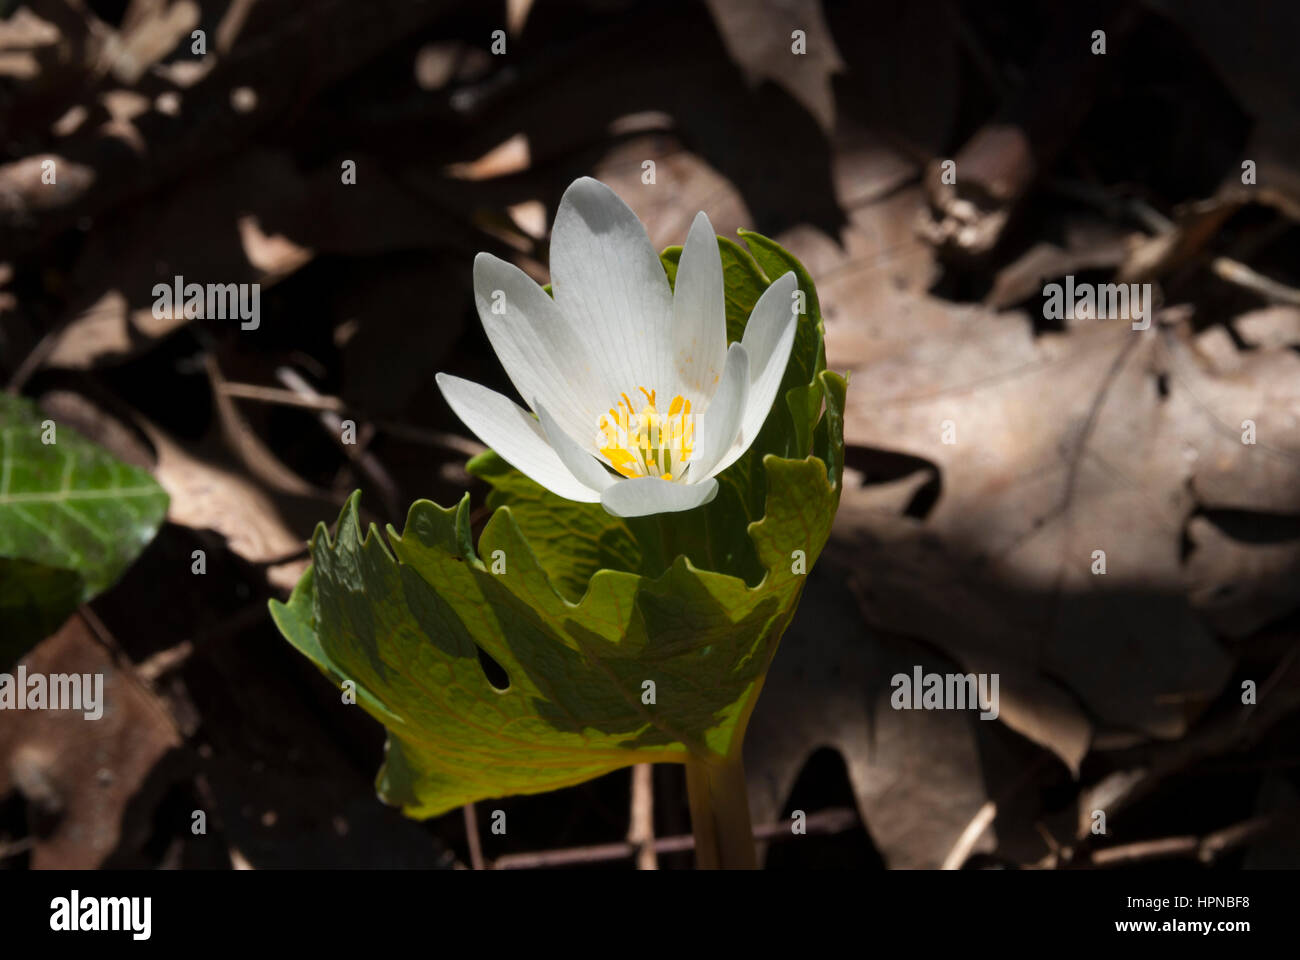 Sanguinaria canadensis is a native North American spring wildflower also known as bloodroot because of the bright red sap the plant oozes when cut. Stock Photo